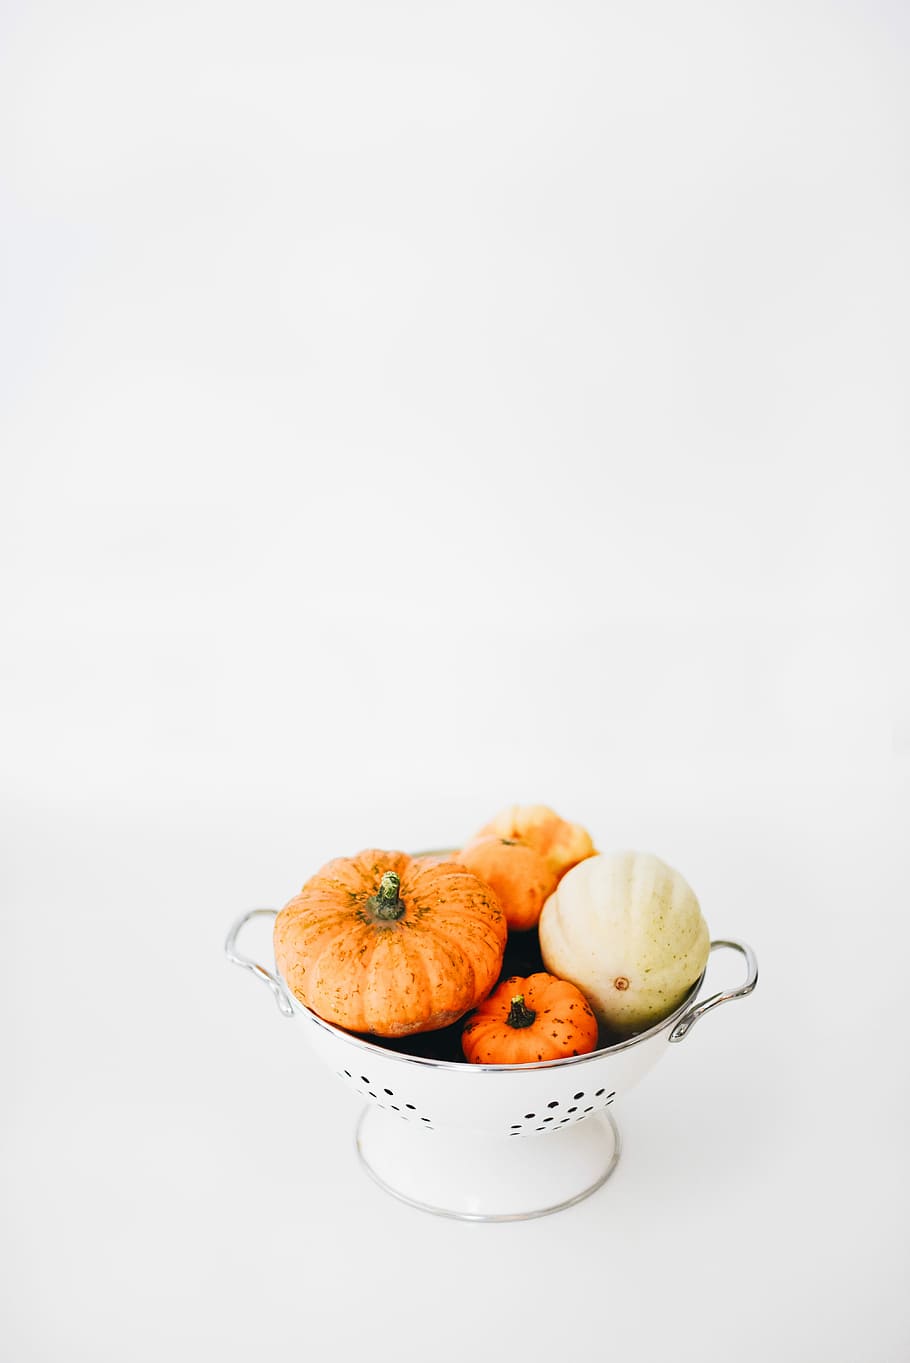 four round orange squashes on colander, assorted vegetables on stainless steel strainer